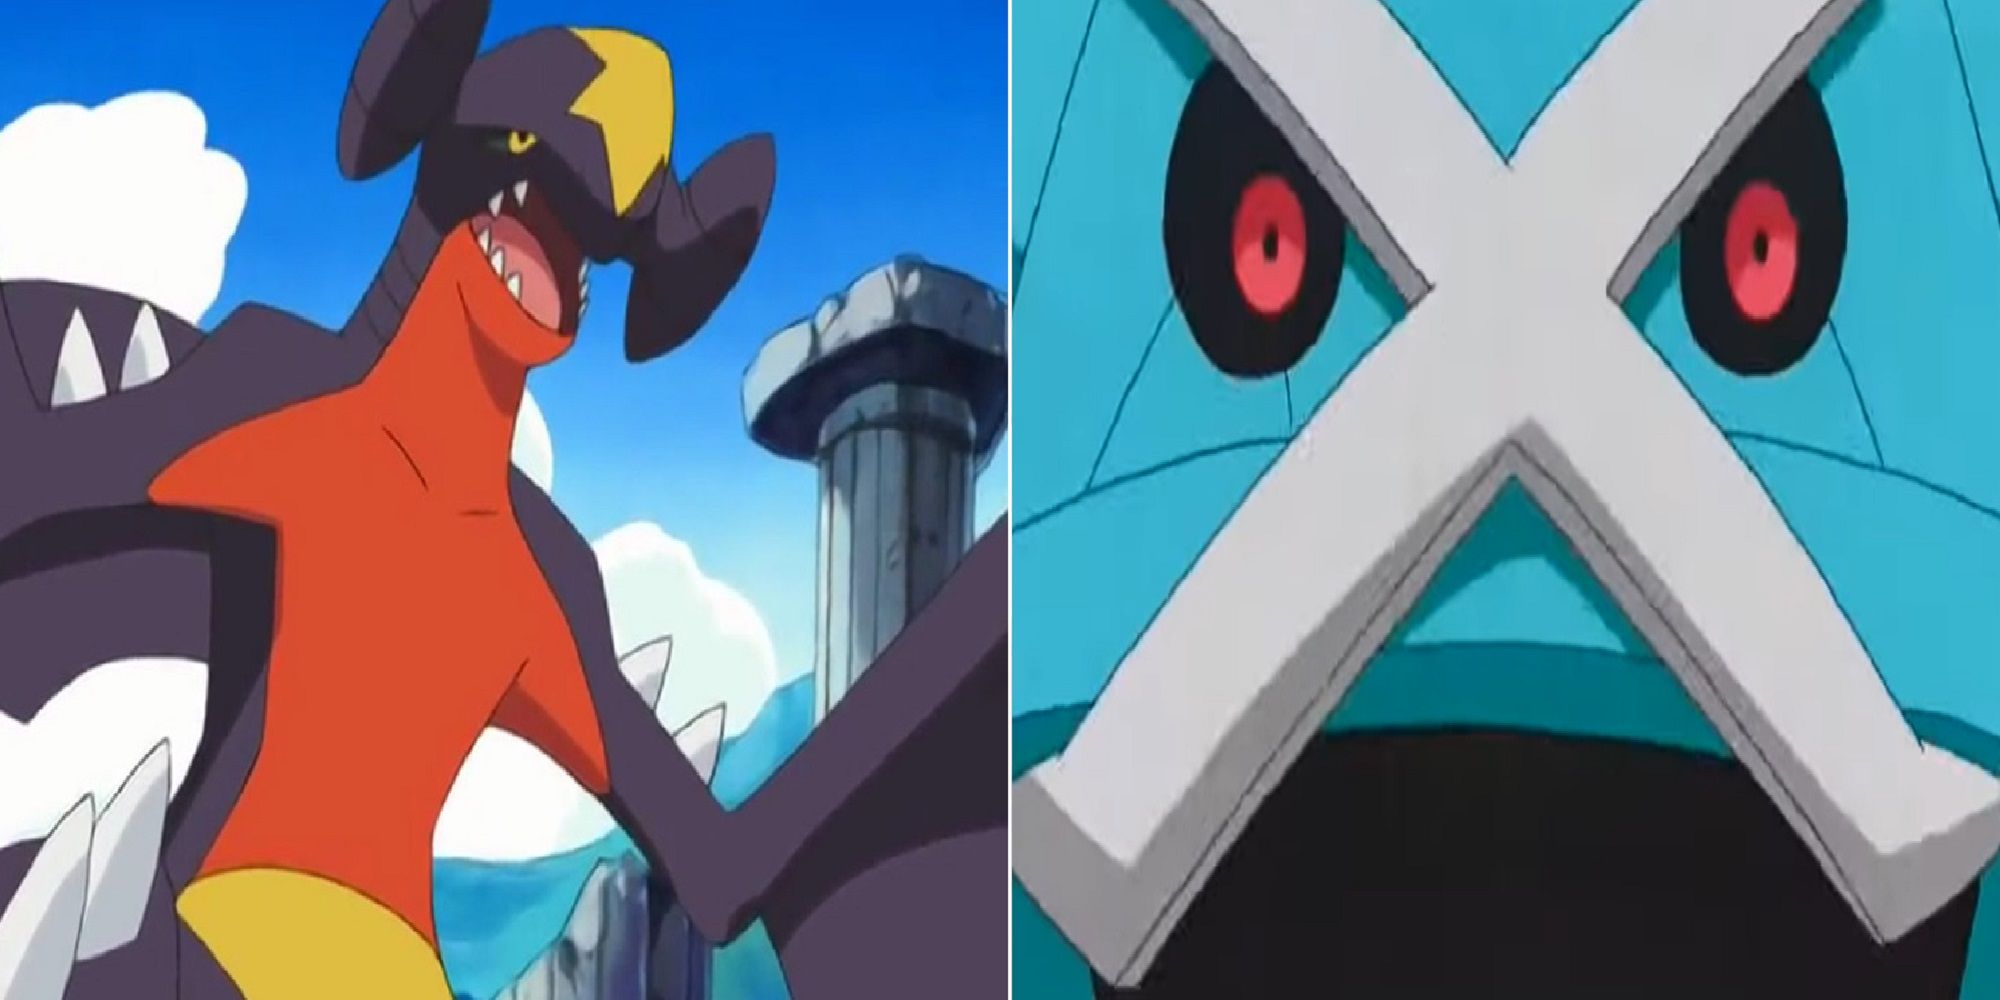 Who do you think is the best pseudo-legendary of Pokemon and why